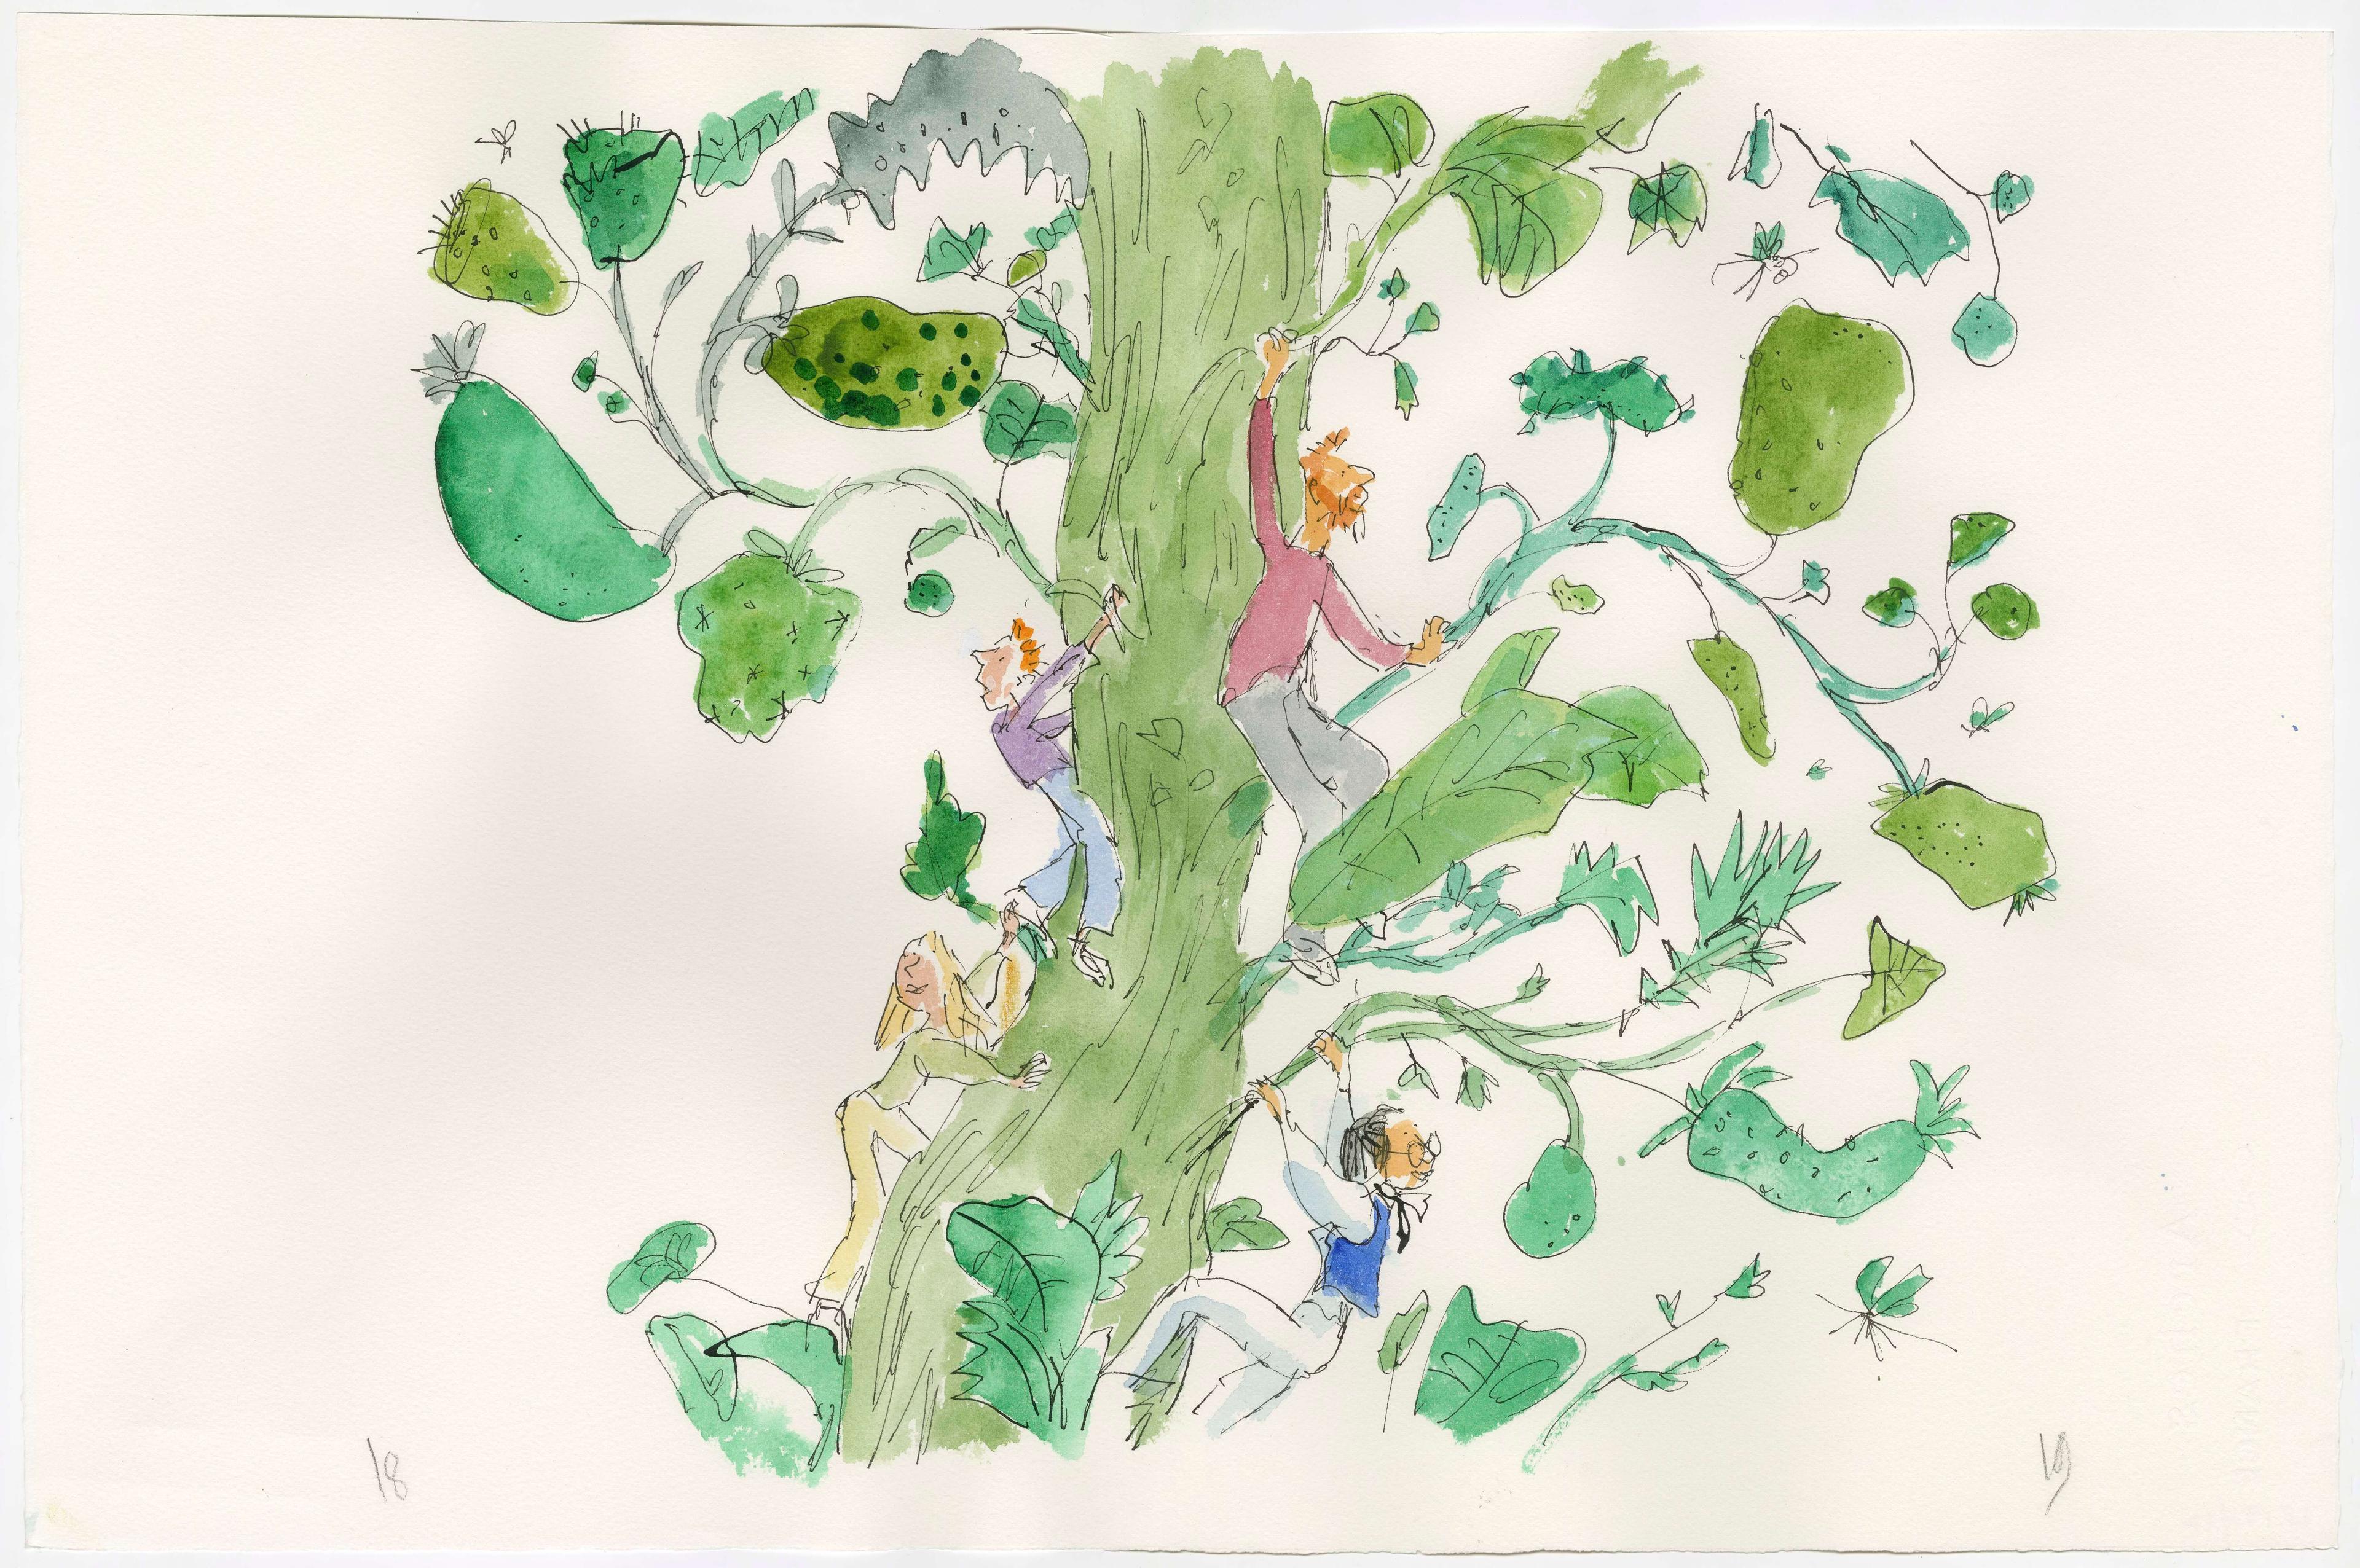 Full colour drawing of whimsical characters climbing a large tree